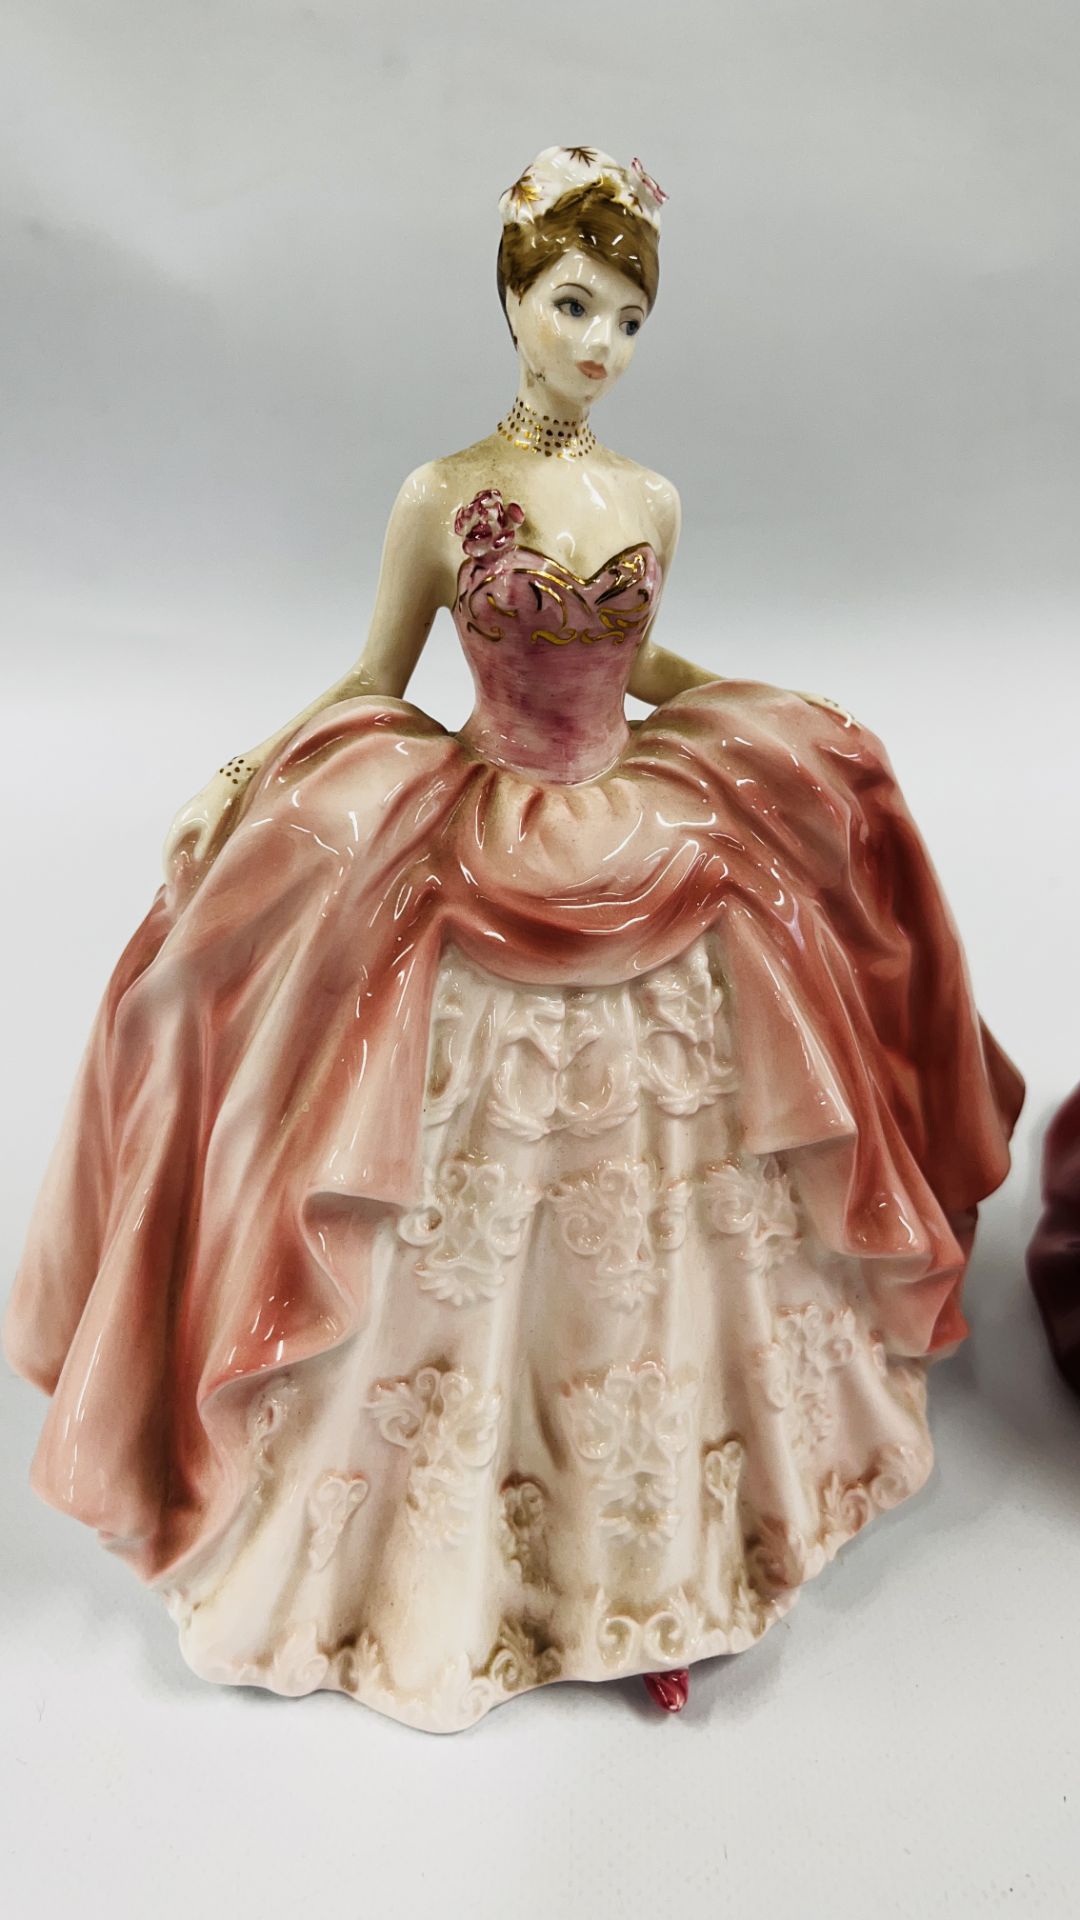 3 COALPORT CABINET COLLECTORS FIGURES TO INCLUDE CLASSIC ELEGANCE "OLIVIA" LIMITED EDITION 1316/7, - Image 5 of 12